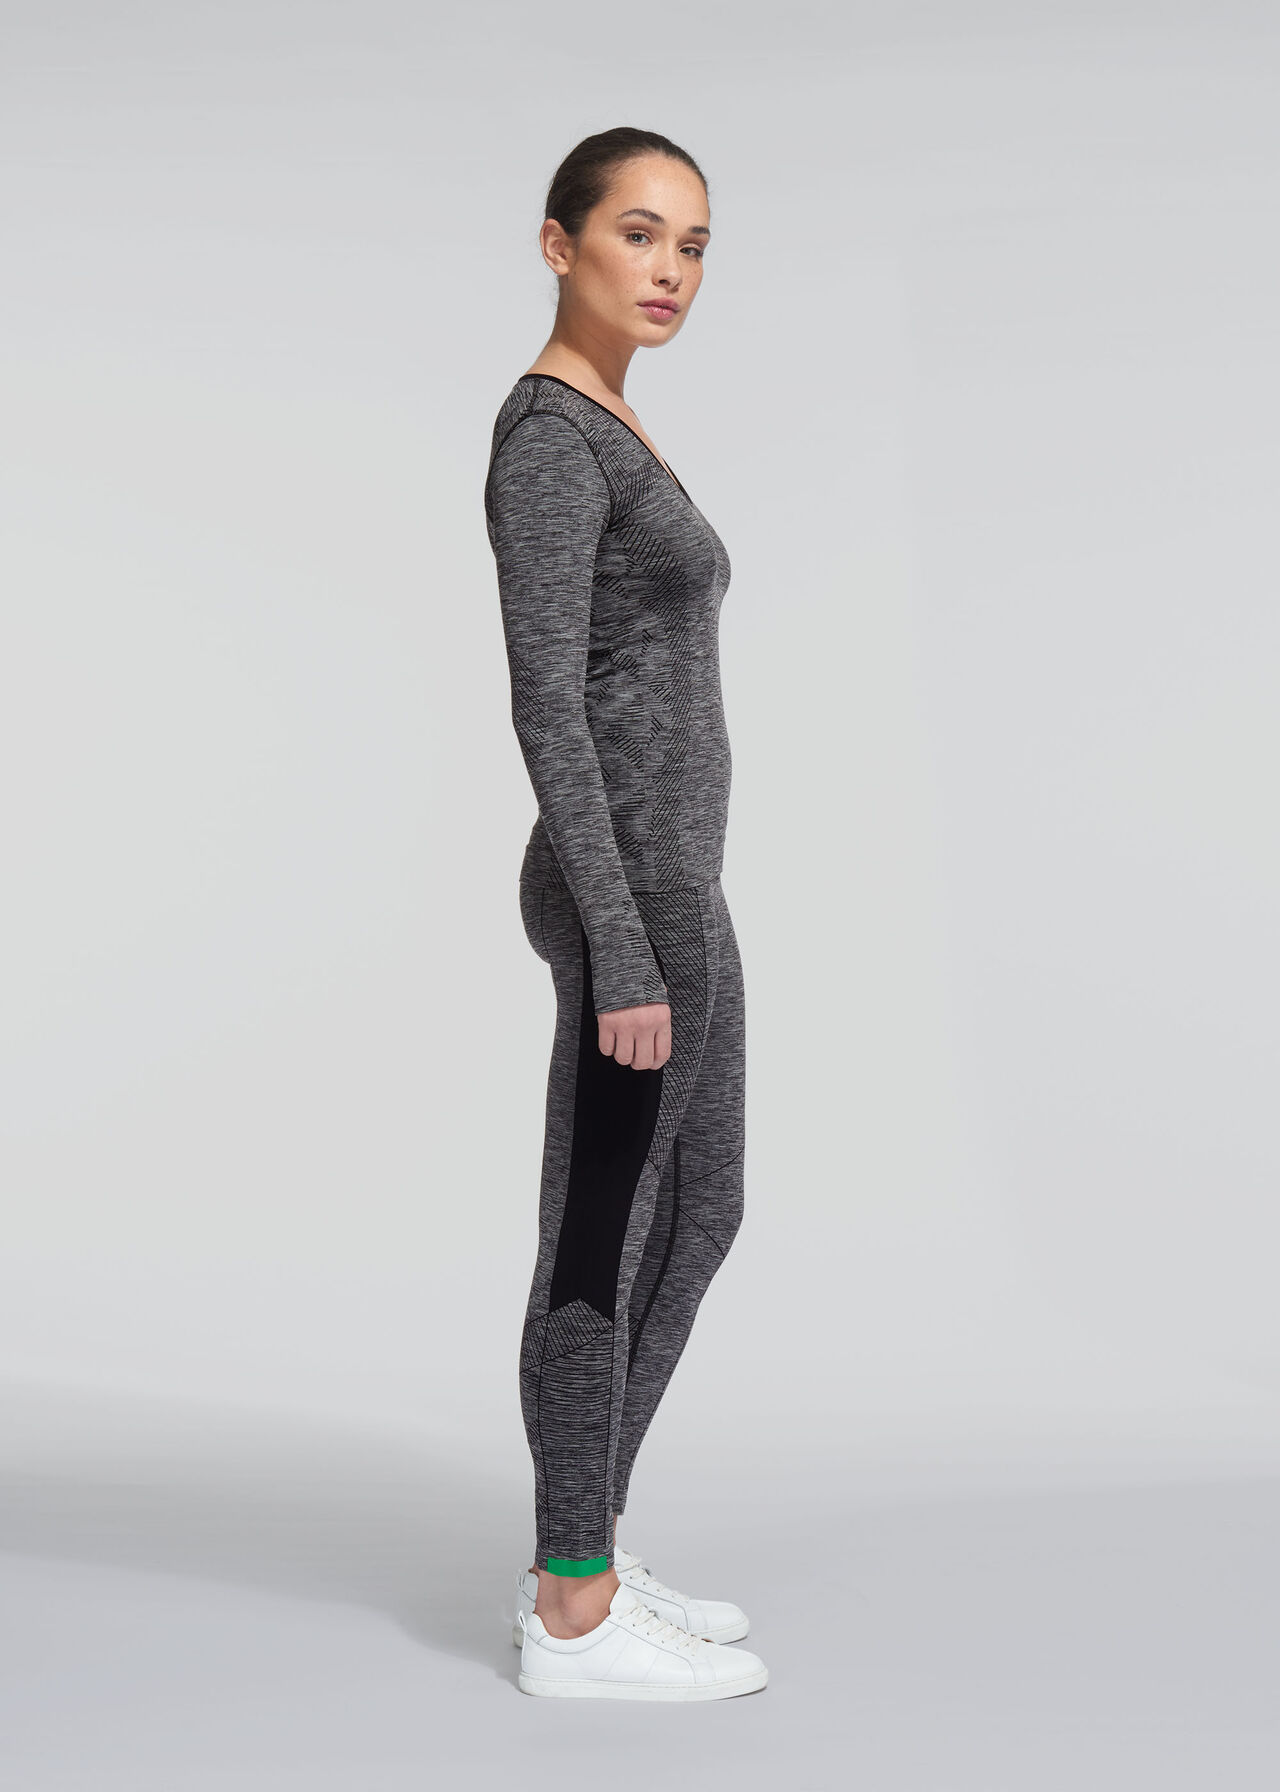 Long Sleeve Sports Top, Grey | WHISTLES